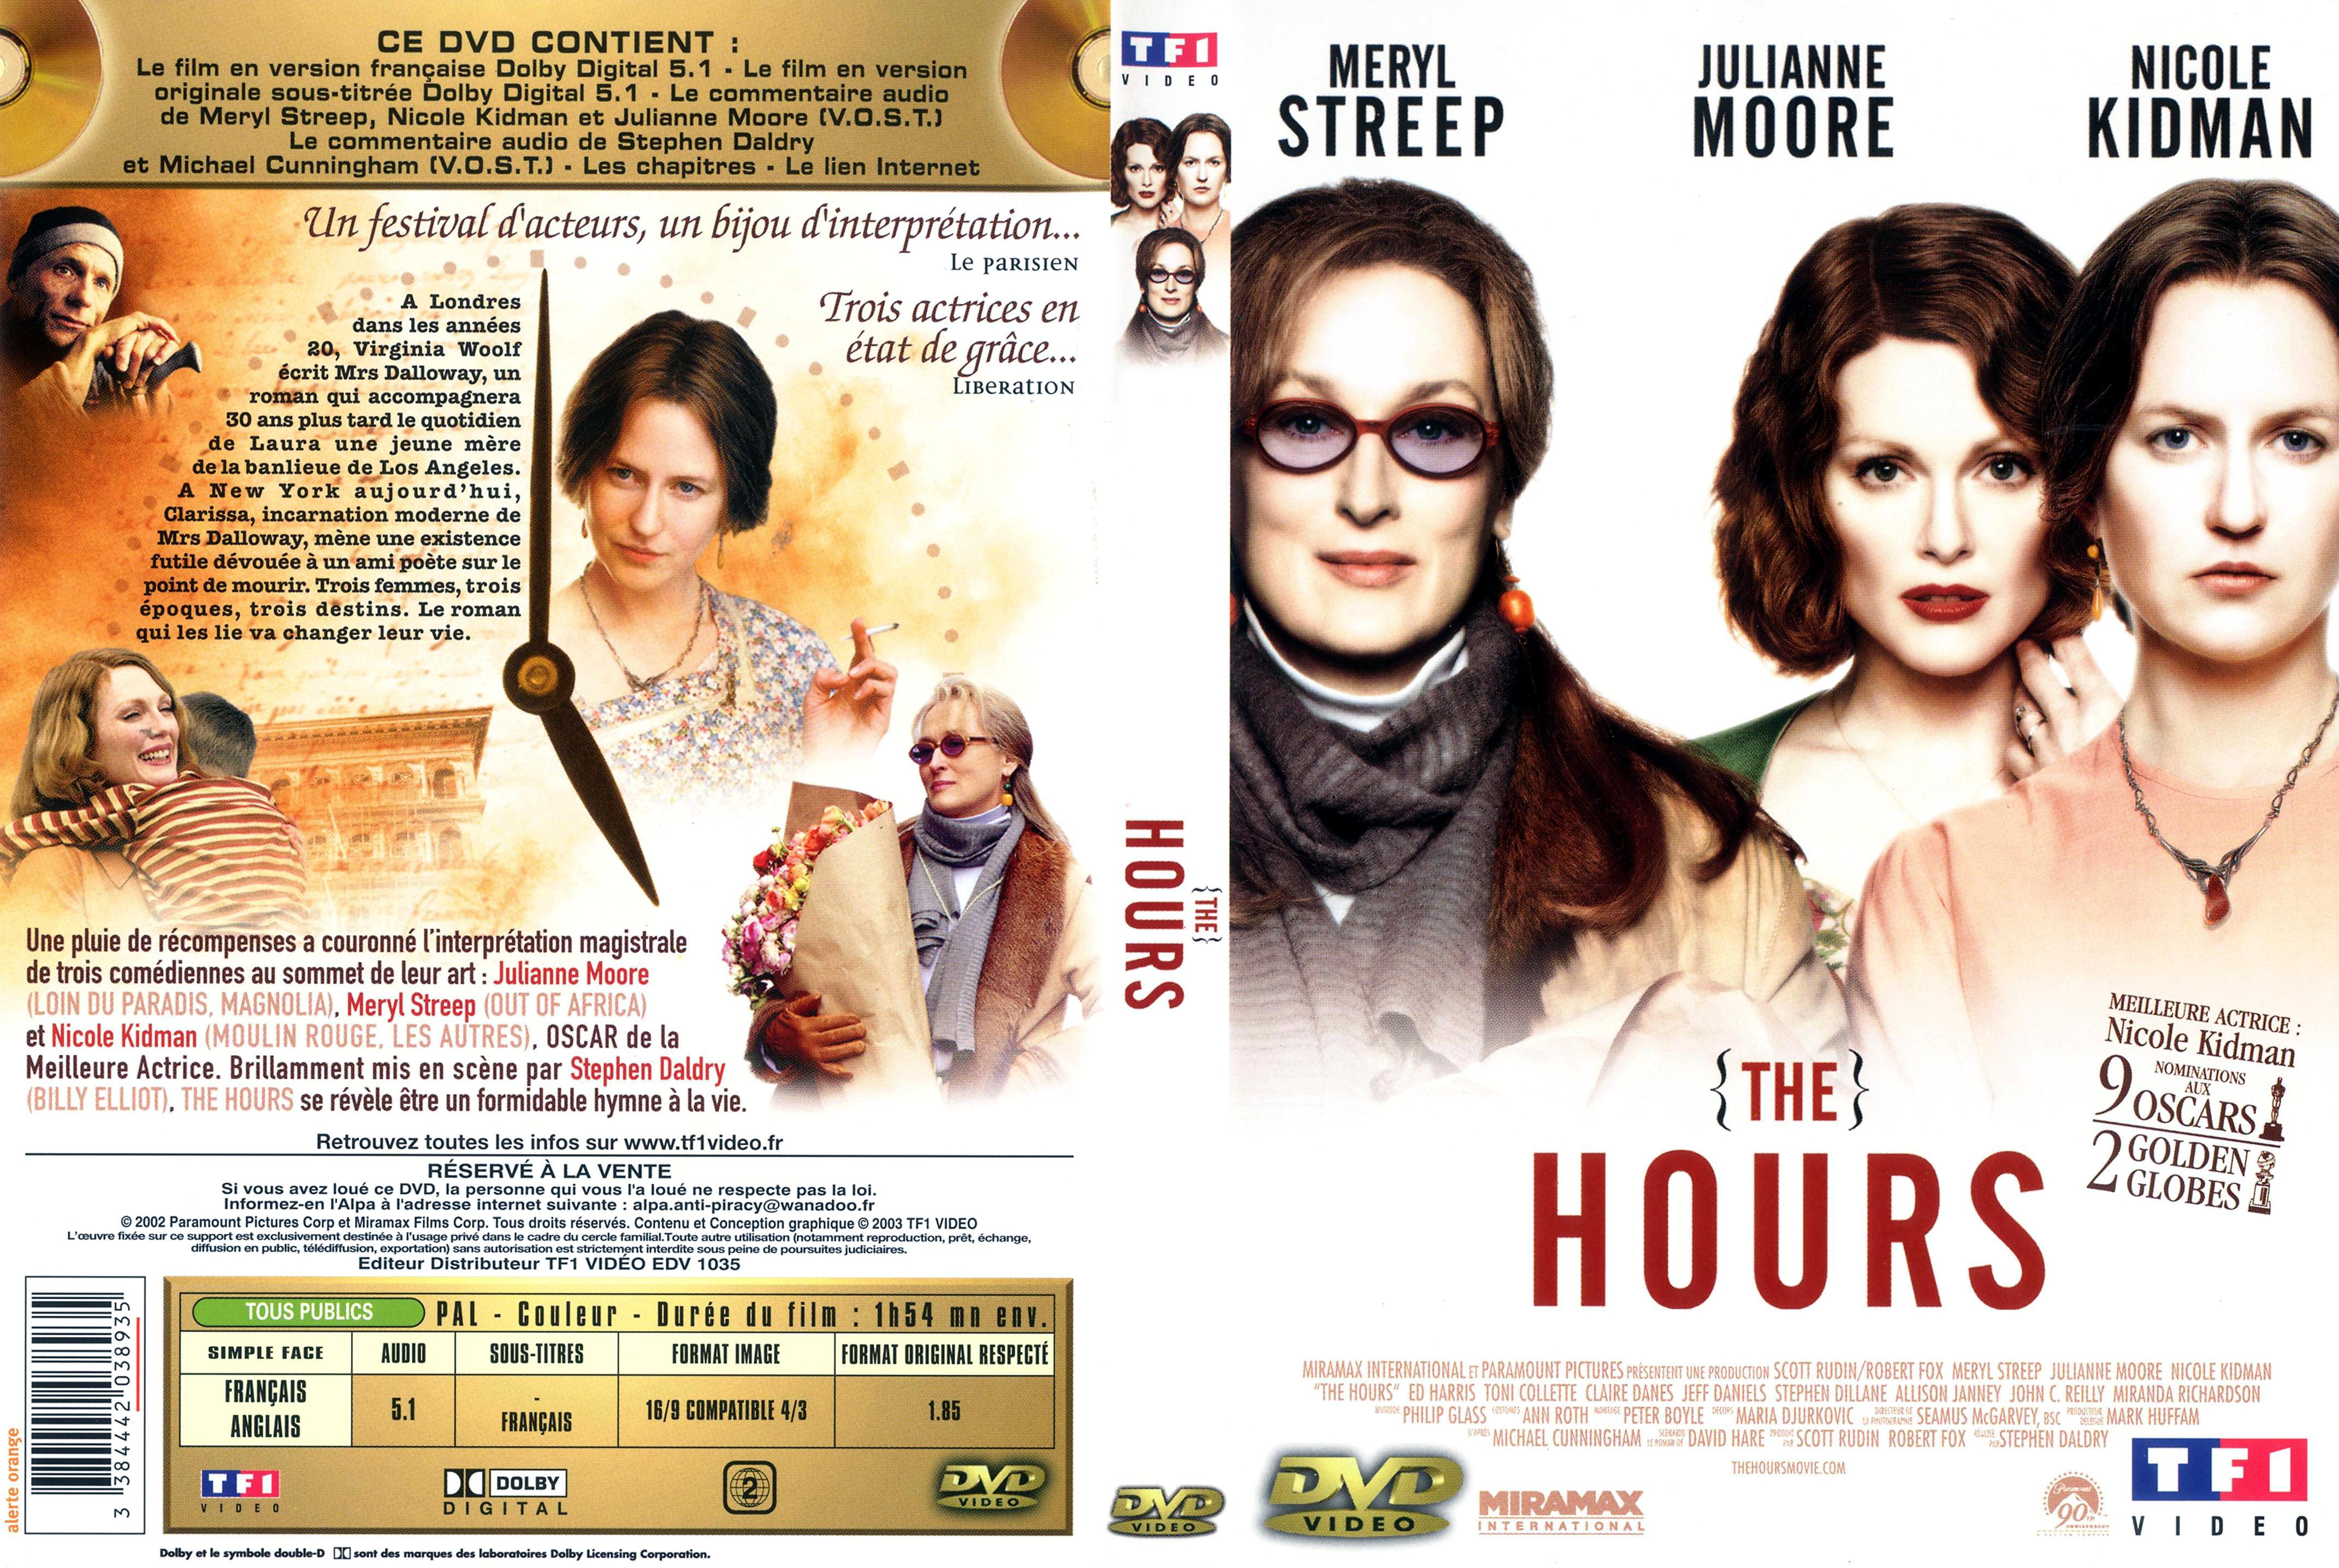 Jaquette DVD The hours v3